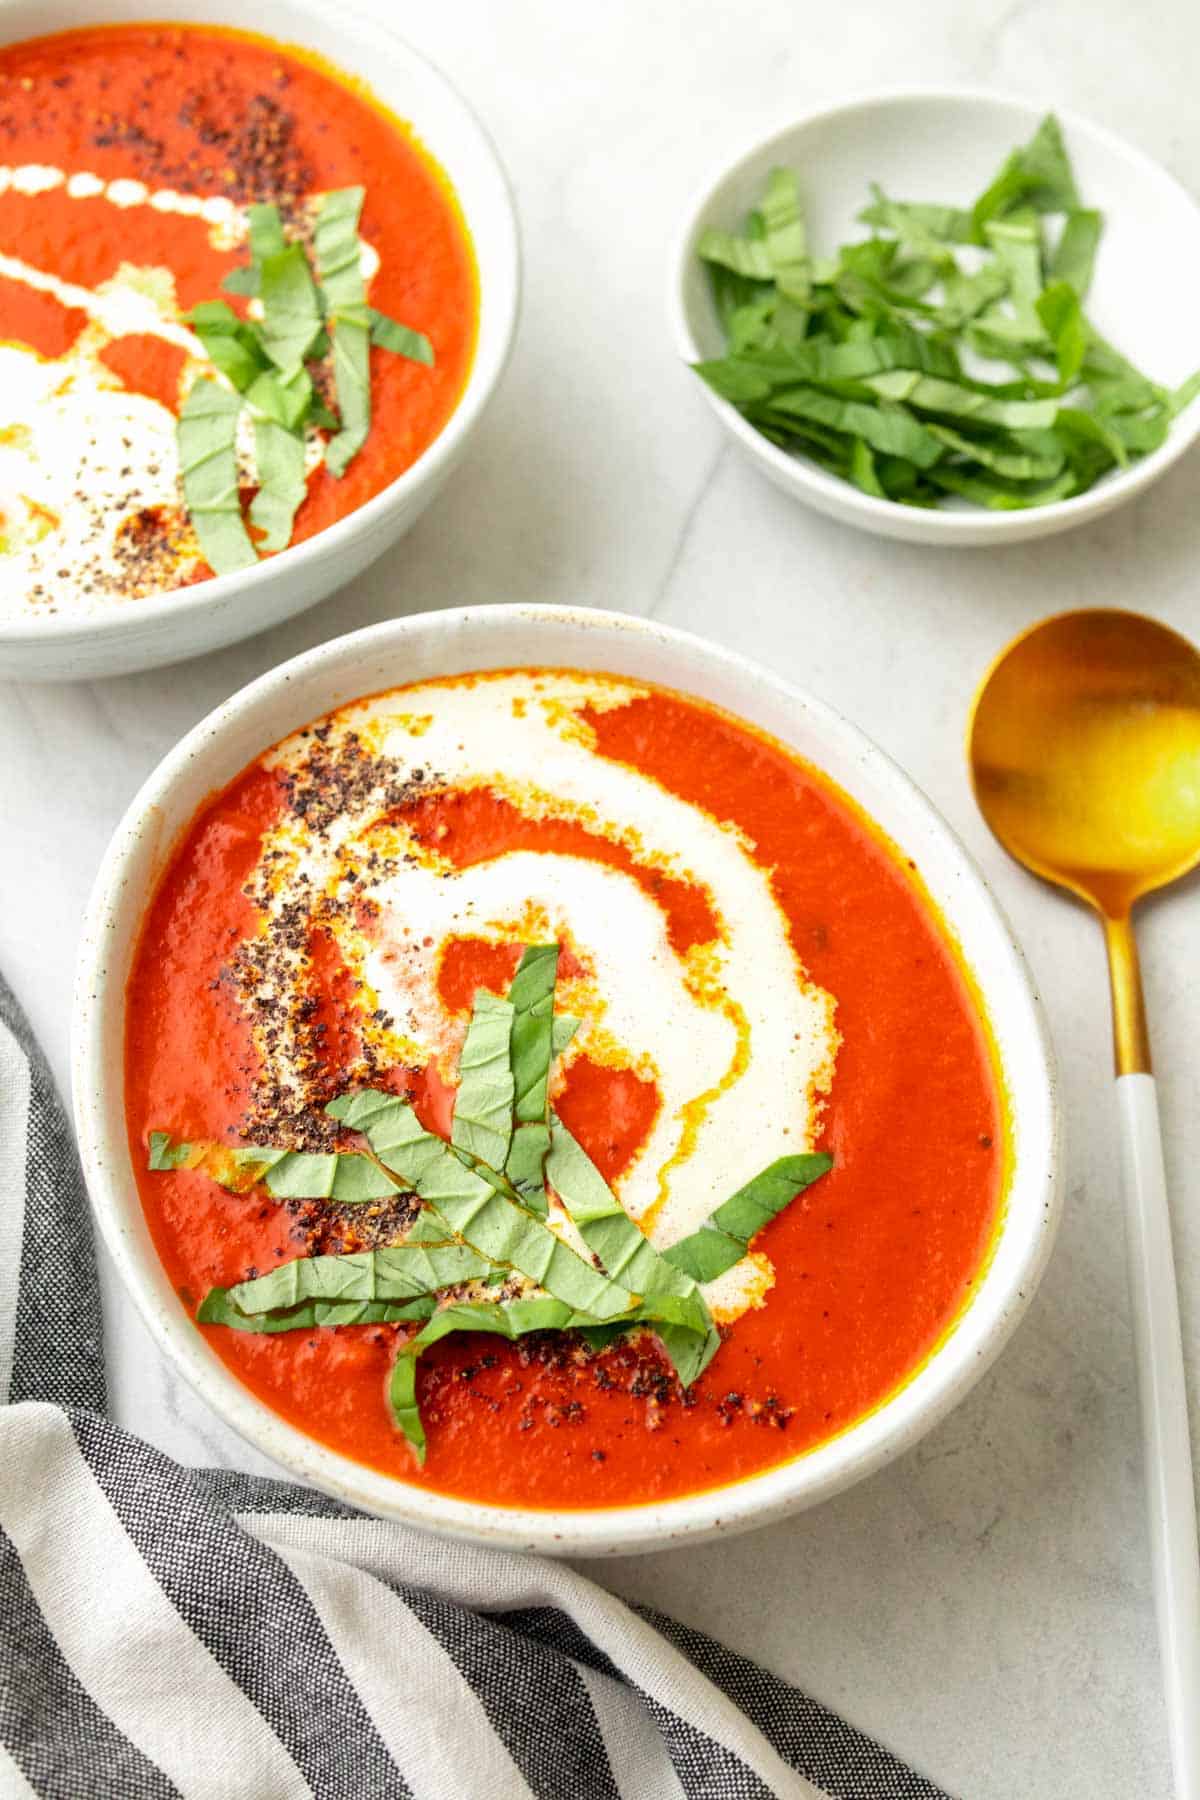 Low sodium tomato soup in a white bowl with cream, fresh basil leaves, and black pepper on top next to a gold spoon and cloth napkin